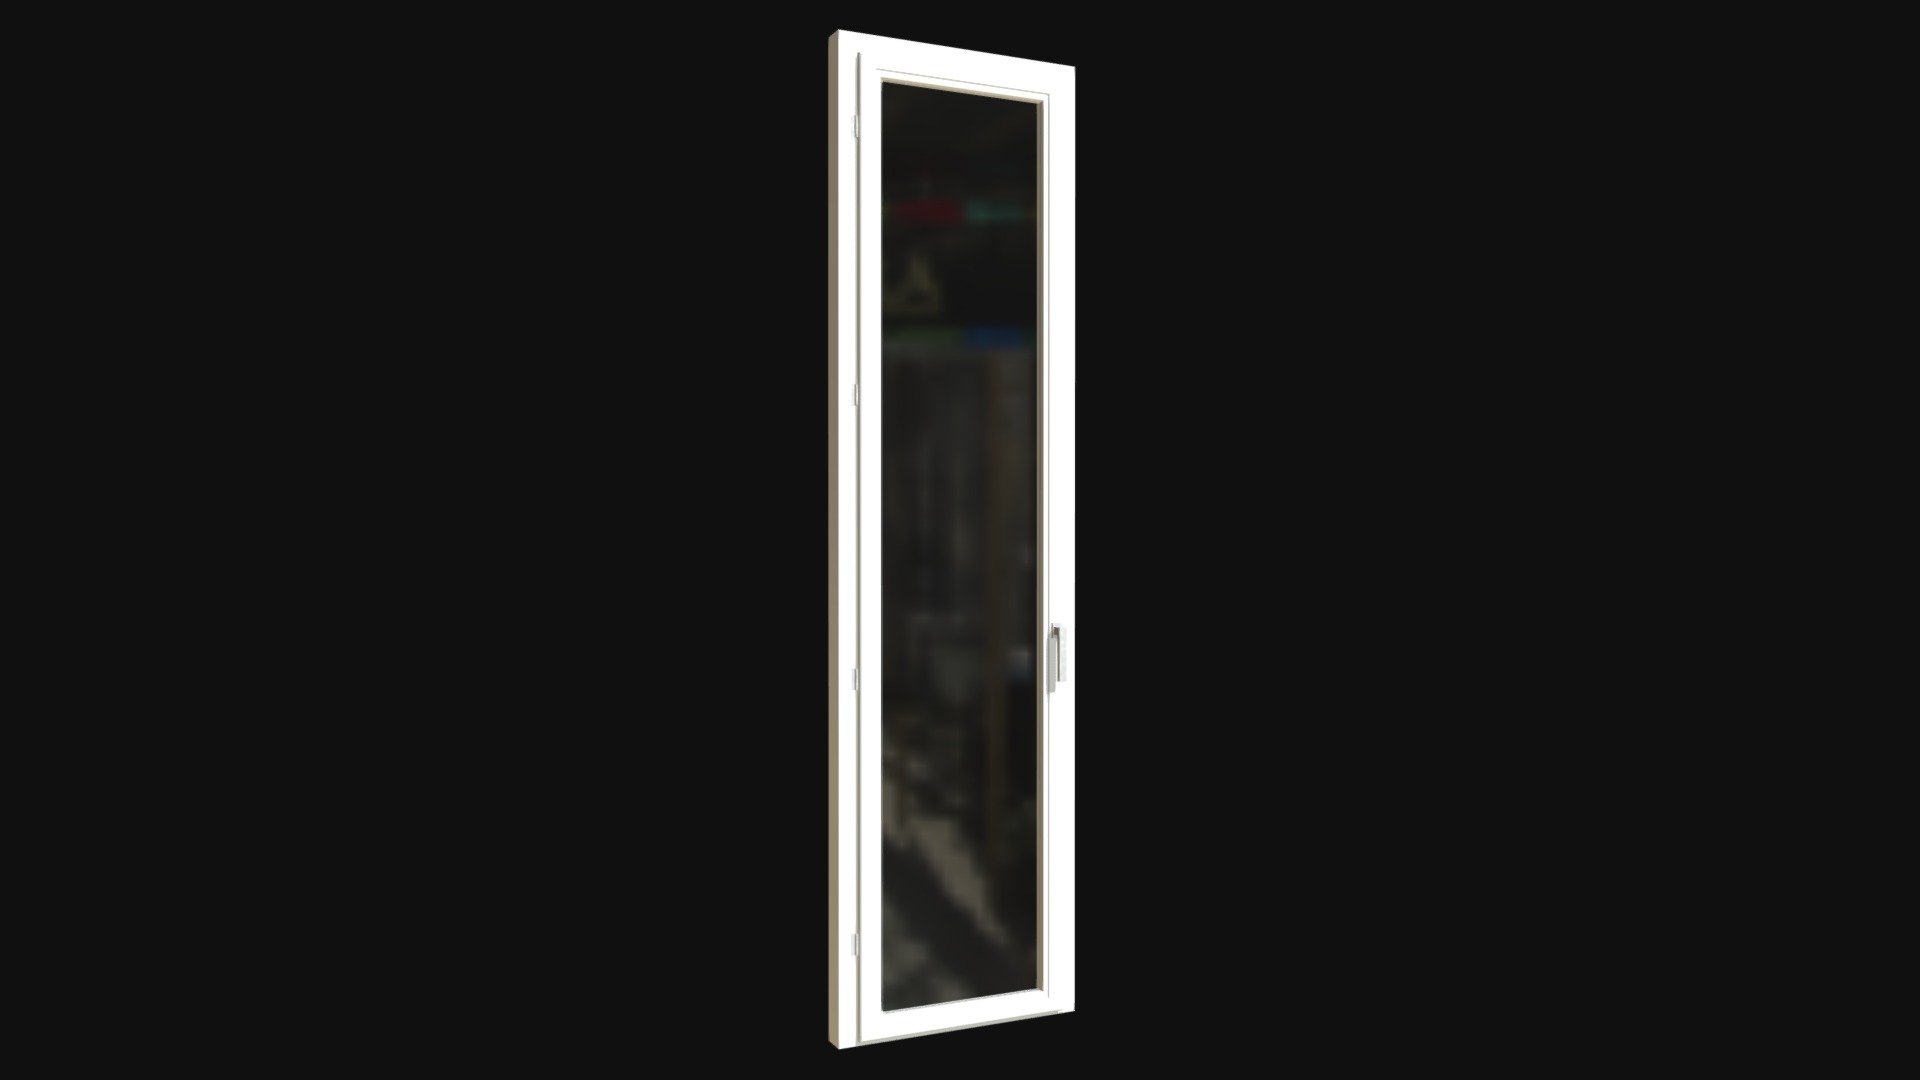 === The following description refers to the additional ZIP package provided with this model ===

French window 3D Model. 4 individual objects (frame, door frame, glass, handle; so, you can easily rotate or even animate them &mdash; see preview images), sharing the same non overlapping UV Layout map, 2 Materials (glass, frames) and PBR Textures sets. Production-ready 3D Model, with PBR materials, textures, non overlapping UV Layout map provided in the package.

Quads only geometries (no tris/ngons).

Formats included: FBX, OBJ; scenes: BLEND (with Cycles / Eevee PBR Materials and Textures); other: png with Alpha.

4 Objects (meshes), 2 PBR Materials, UV unwrapped (non overlapping UV Layout map provided in the package); UV-mapped Textures.

UV Layout maps and Image Textures resolutions: 2048x2048; PBR Textures made with Substance Painter.

Polygonal, QUADS ONLY (no tris/ngons); 8222 vertices, 8192 quad faces (16384 tris).

Real world dimensions; scene scale units: cm in Blender (that is: Metric with 0.01 scale) 3d model